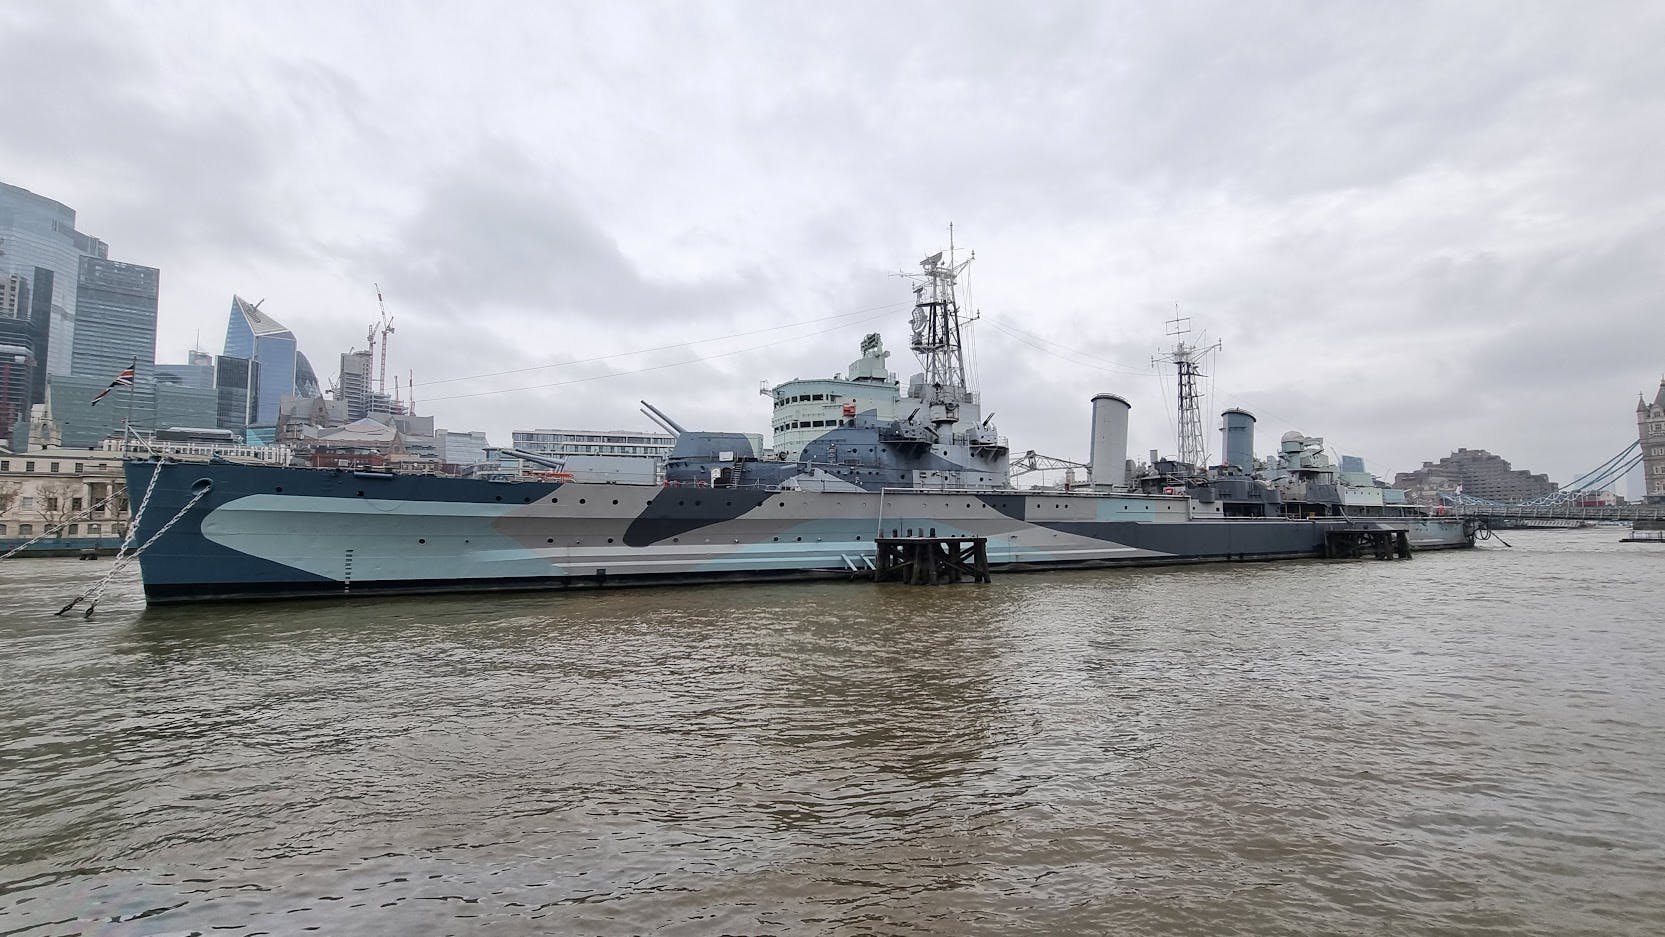 HMS Belfast to be reactivated for patrol work